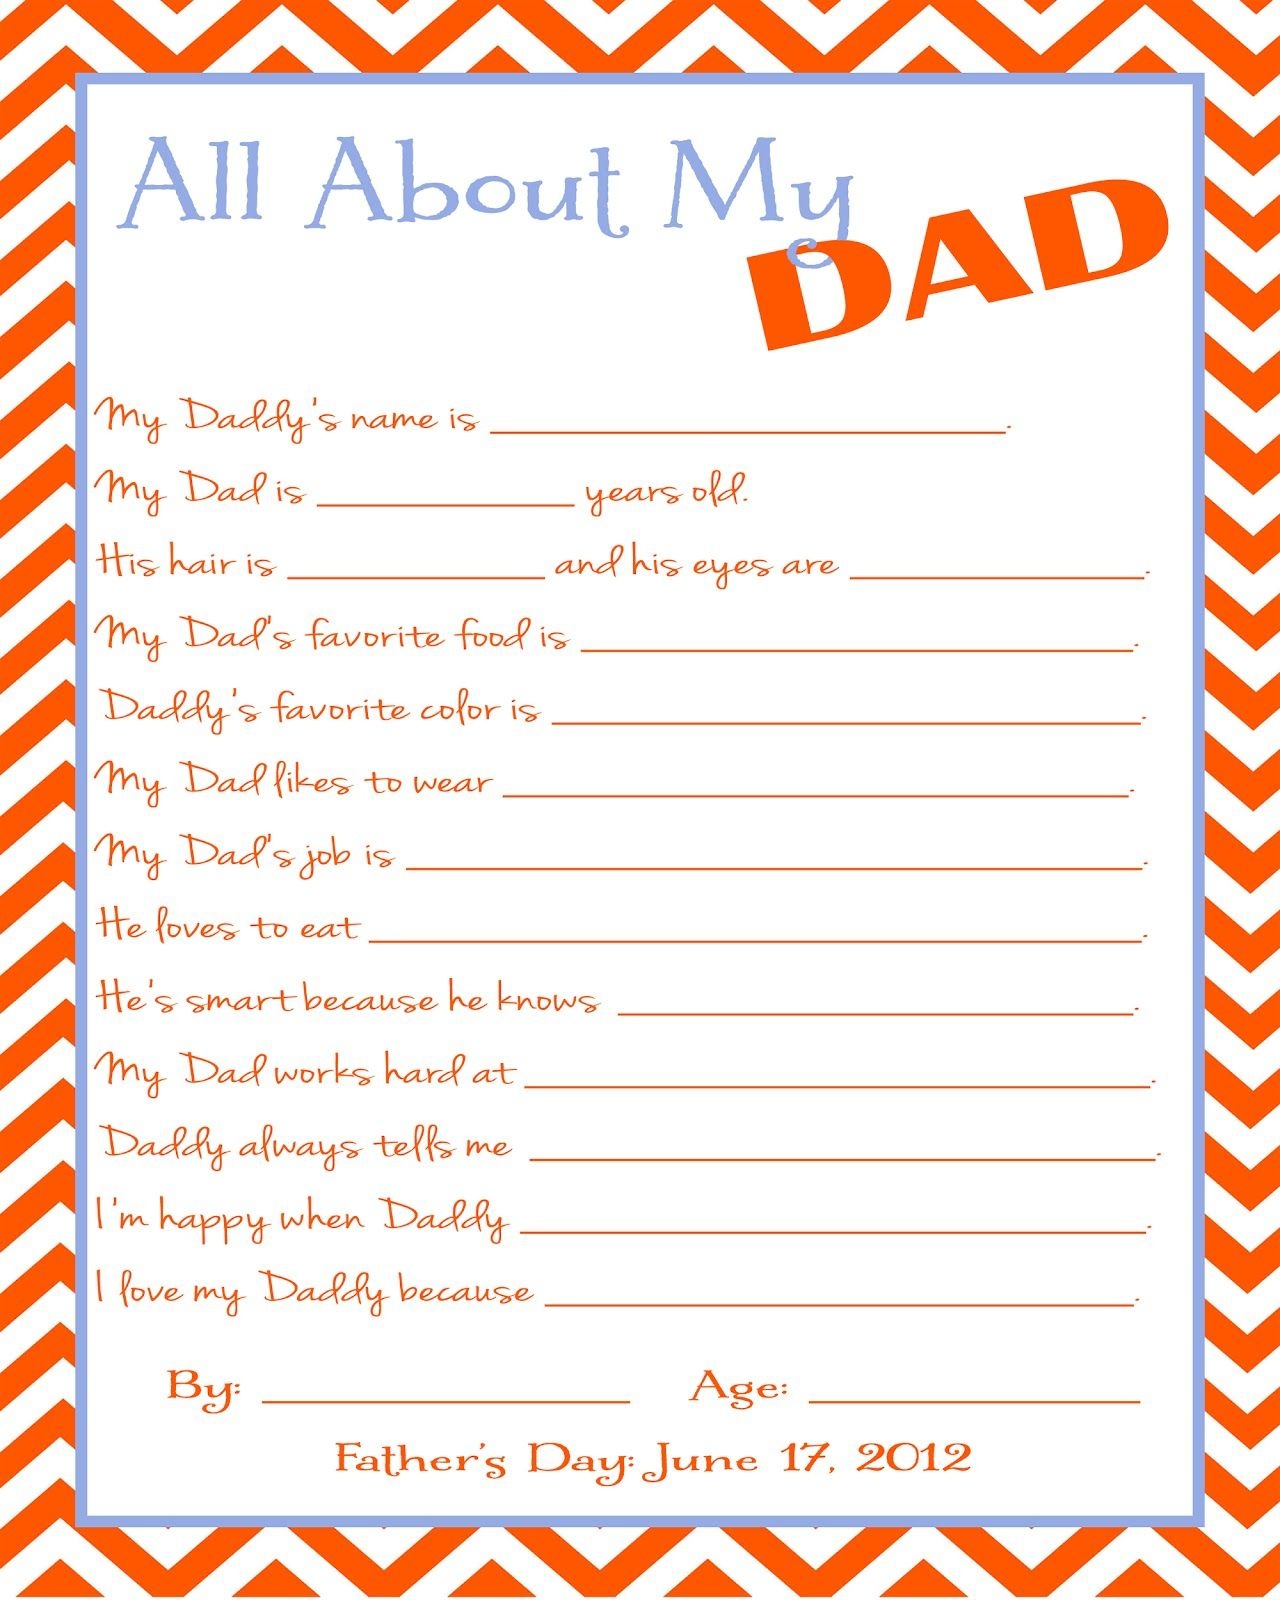 Super Cute Questionnaire For Father&amp;#039;s Day. | Craft Ideas | Father&amp;#039;s - Free Printable Dad Questionnaire